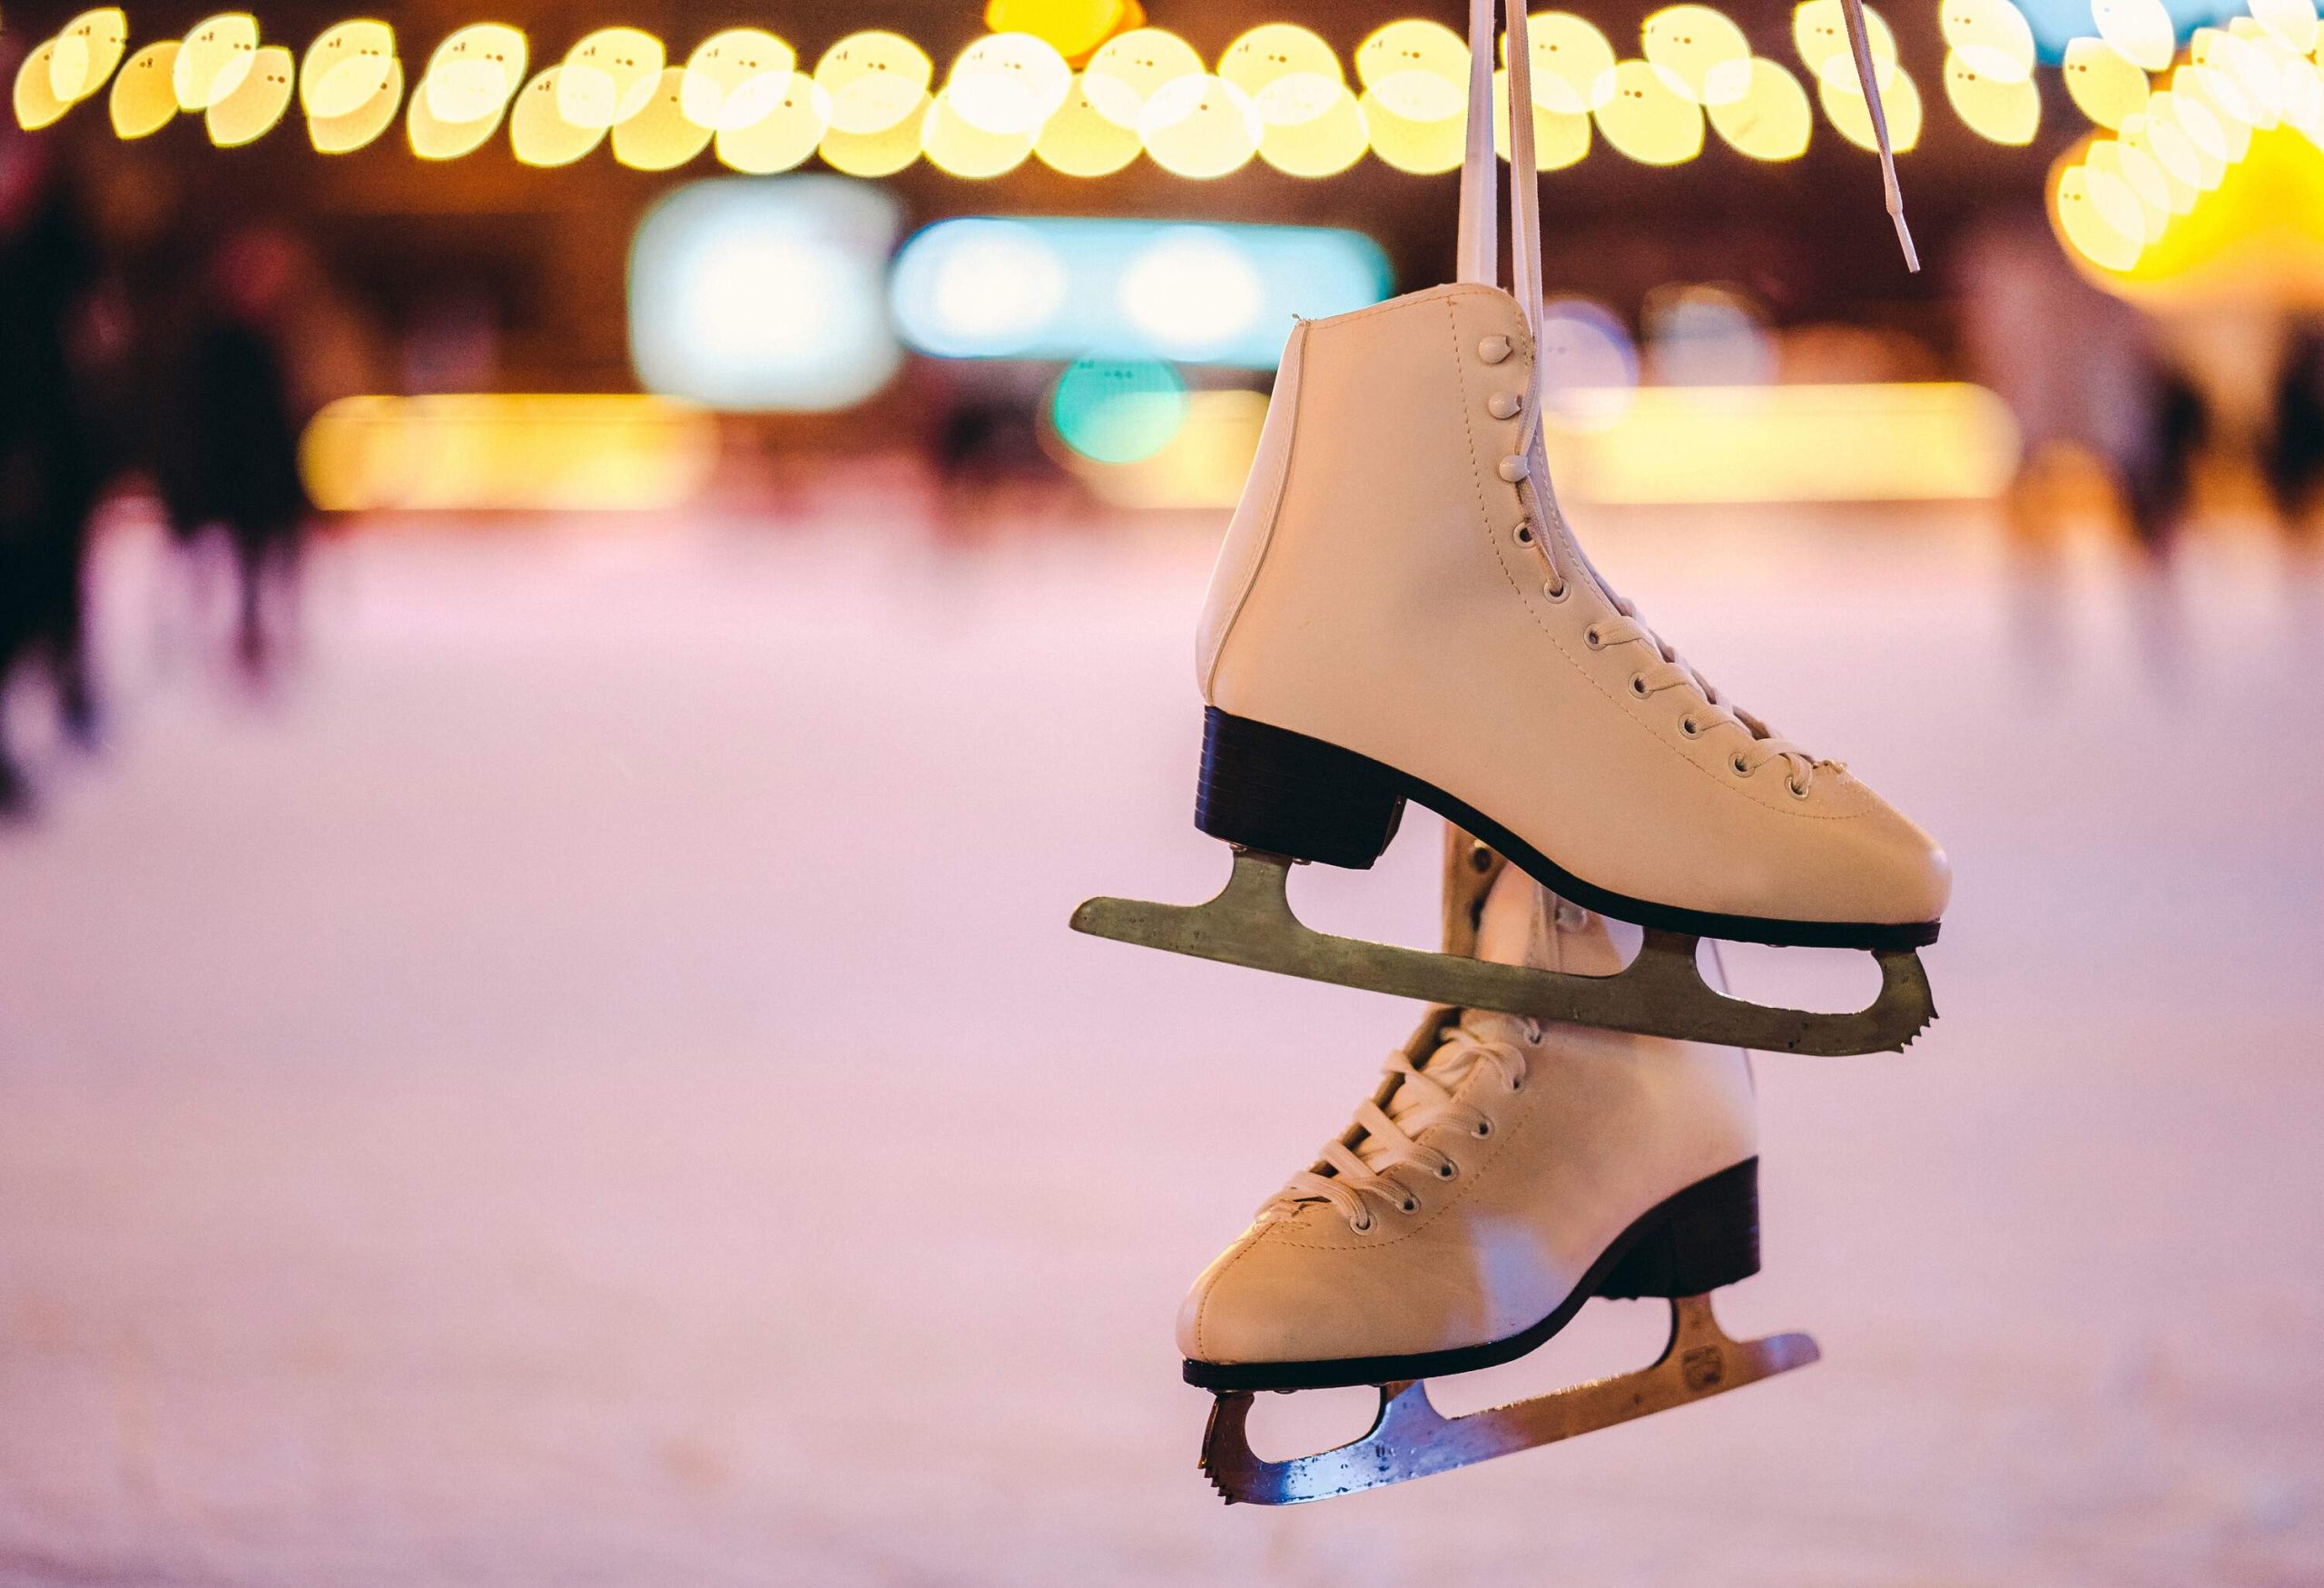 A pair of ice rink skates hung on top of each other.